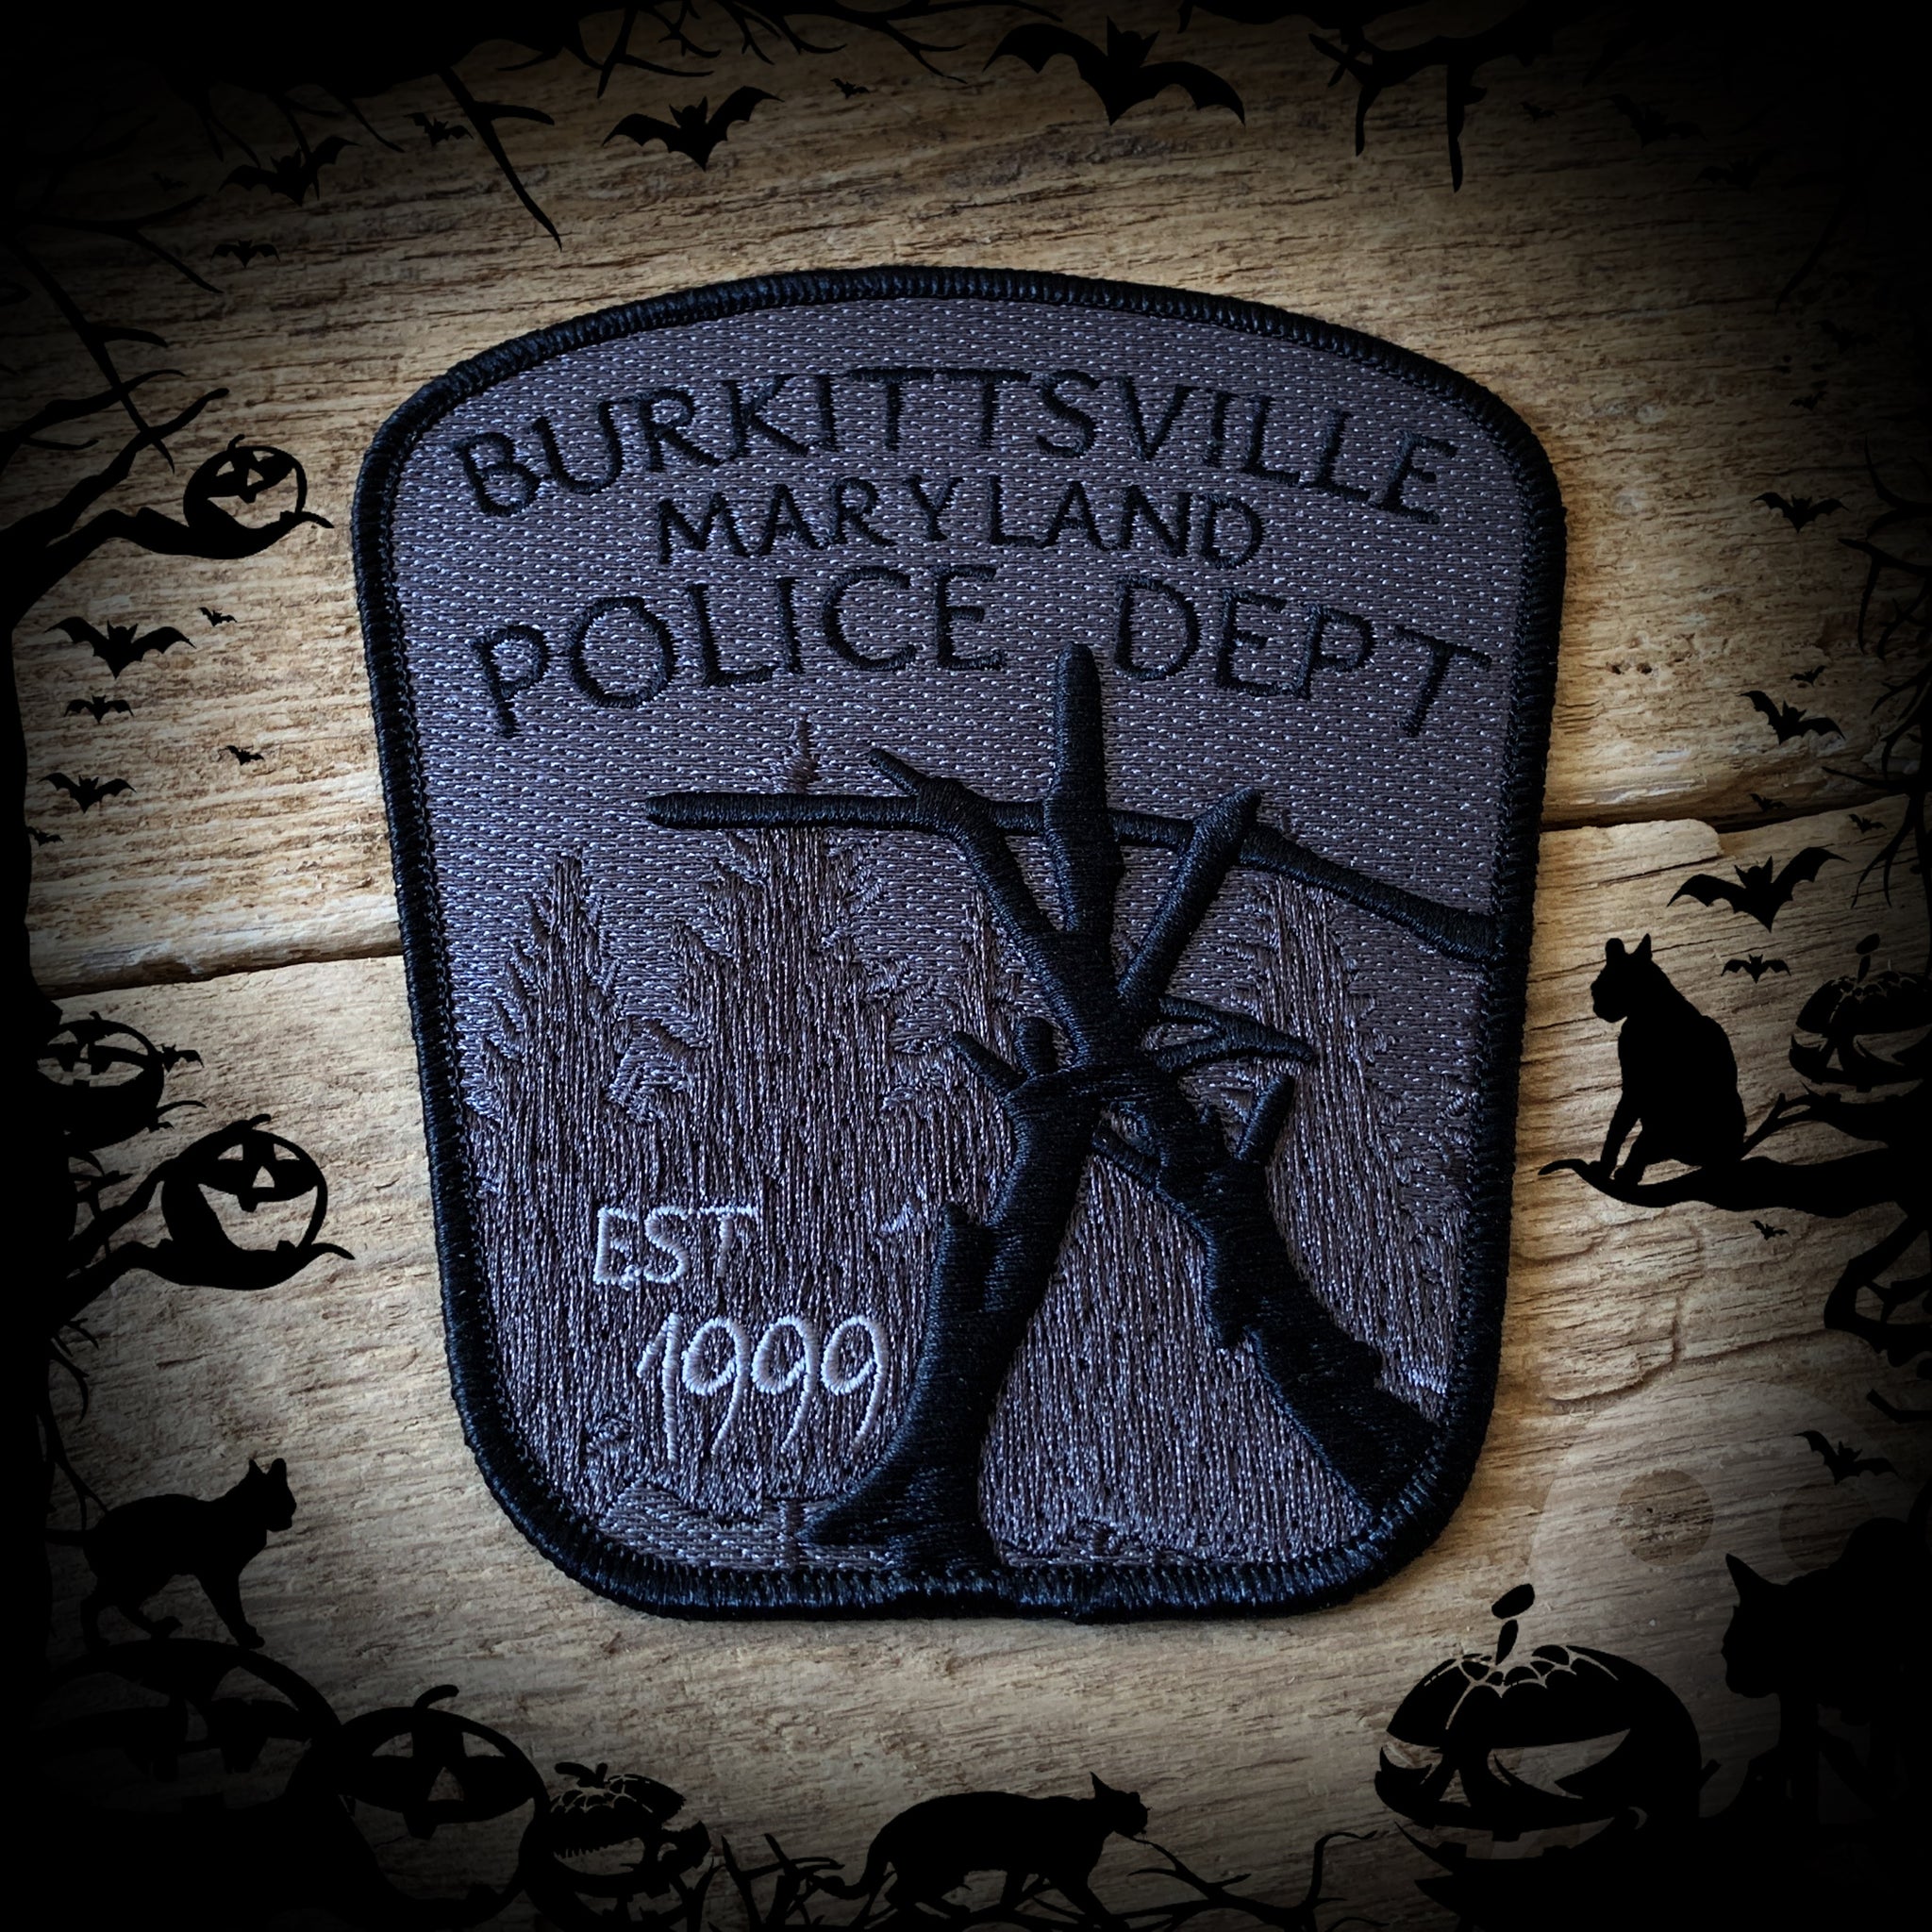 #20 Burkittsville, MD Police Department - The Blair Witch Project